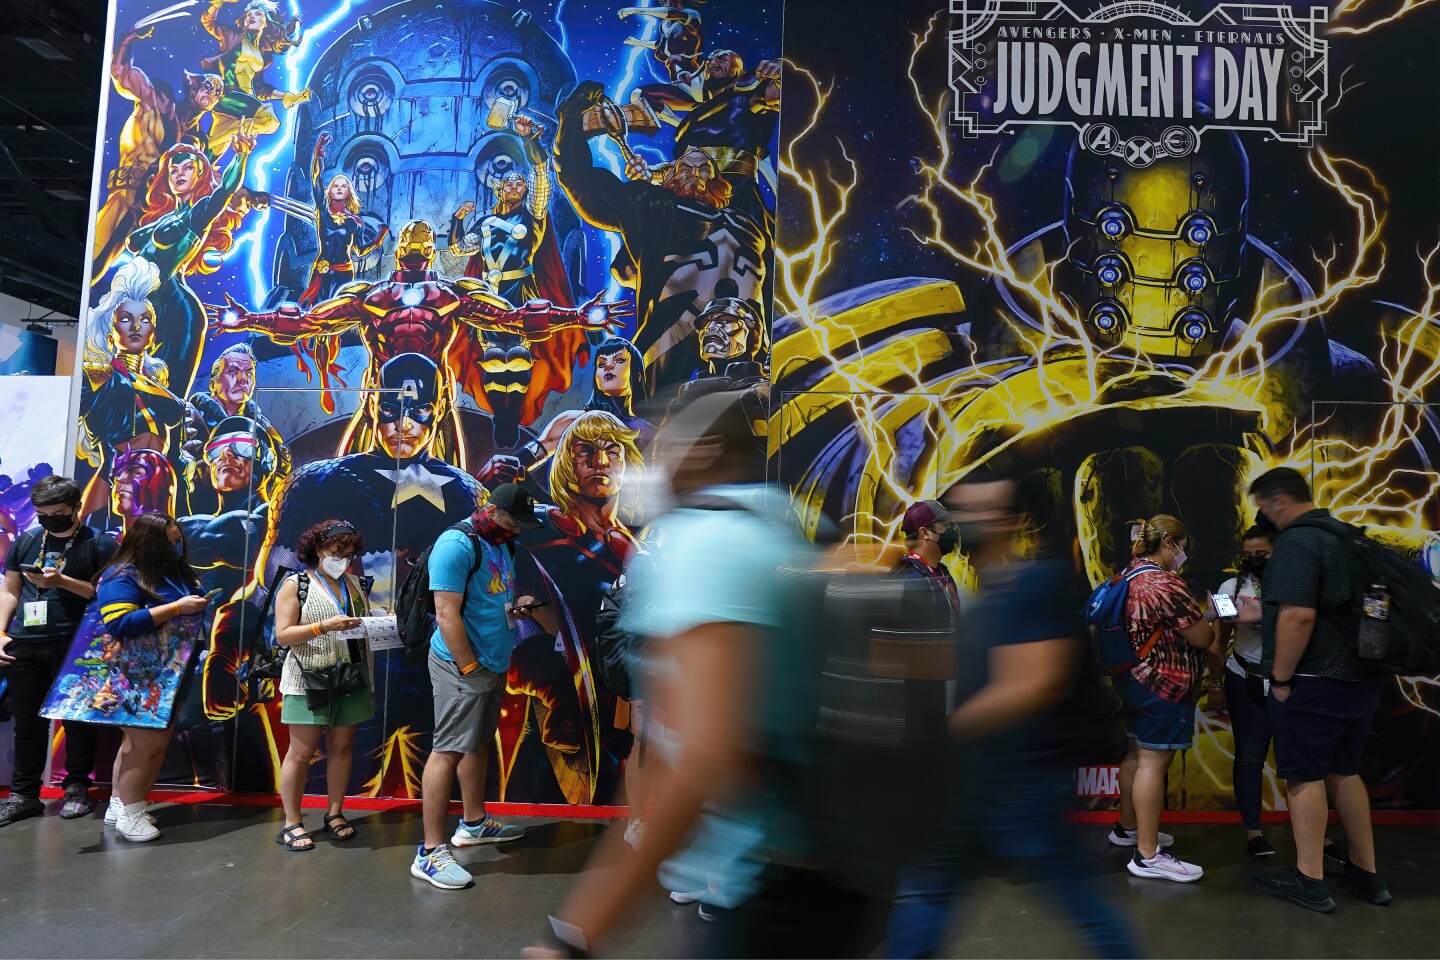 San Diego, CA - July 20: At San Diego Convention Center on Wednesday, July 20, 2022 in San Diego, CA., several people wait in line to enter the Marvel retail booth, while others navigate the exhibit floor for Comic-Con 2022. (Nelvin C. Cepeda / The San Diego Union-Tribune)